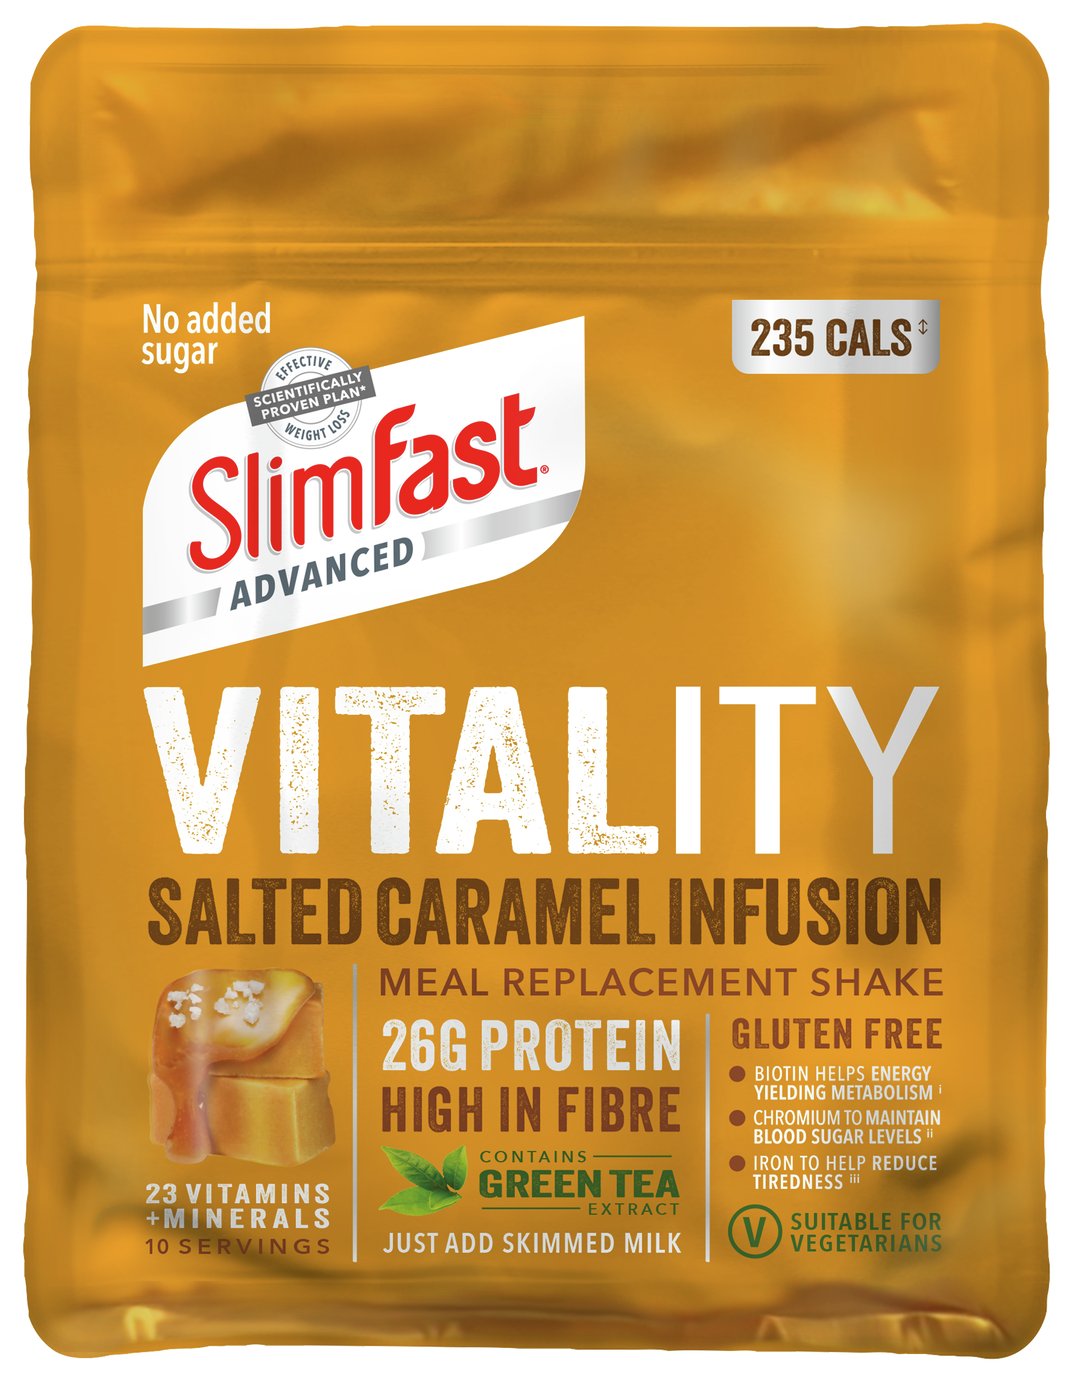 SlimFast Advanced Vitality Salted Caramel Infusion Shakes review